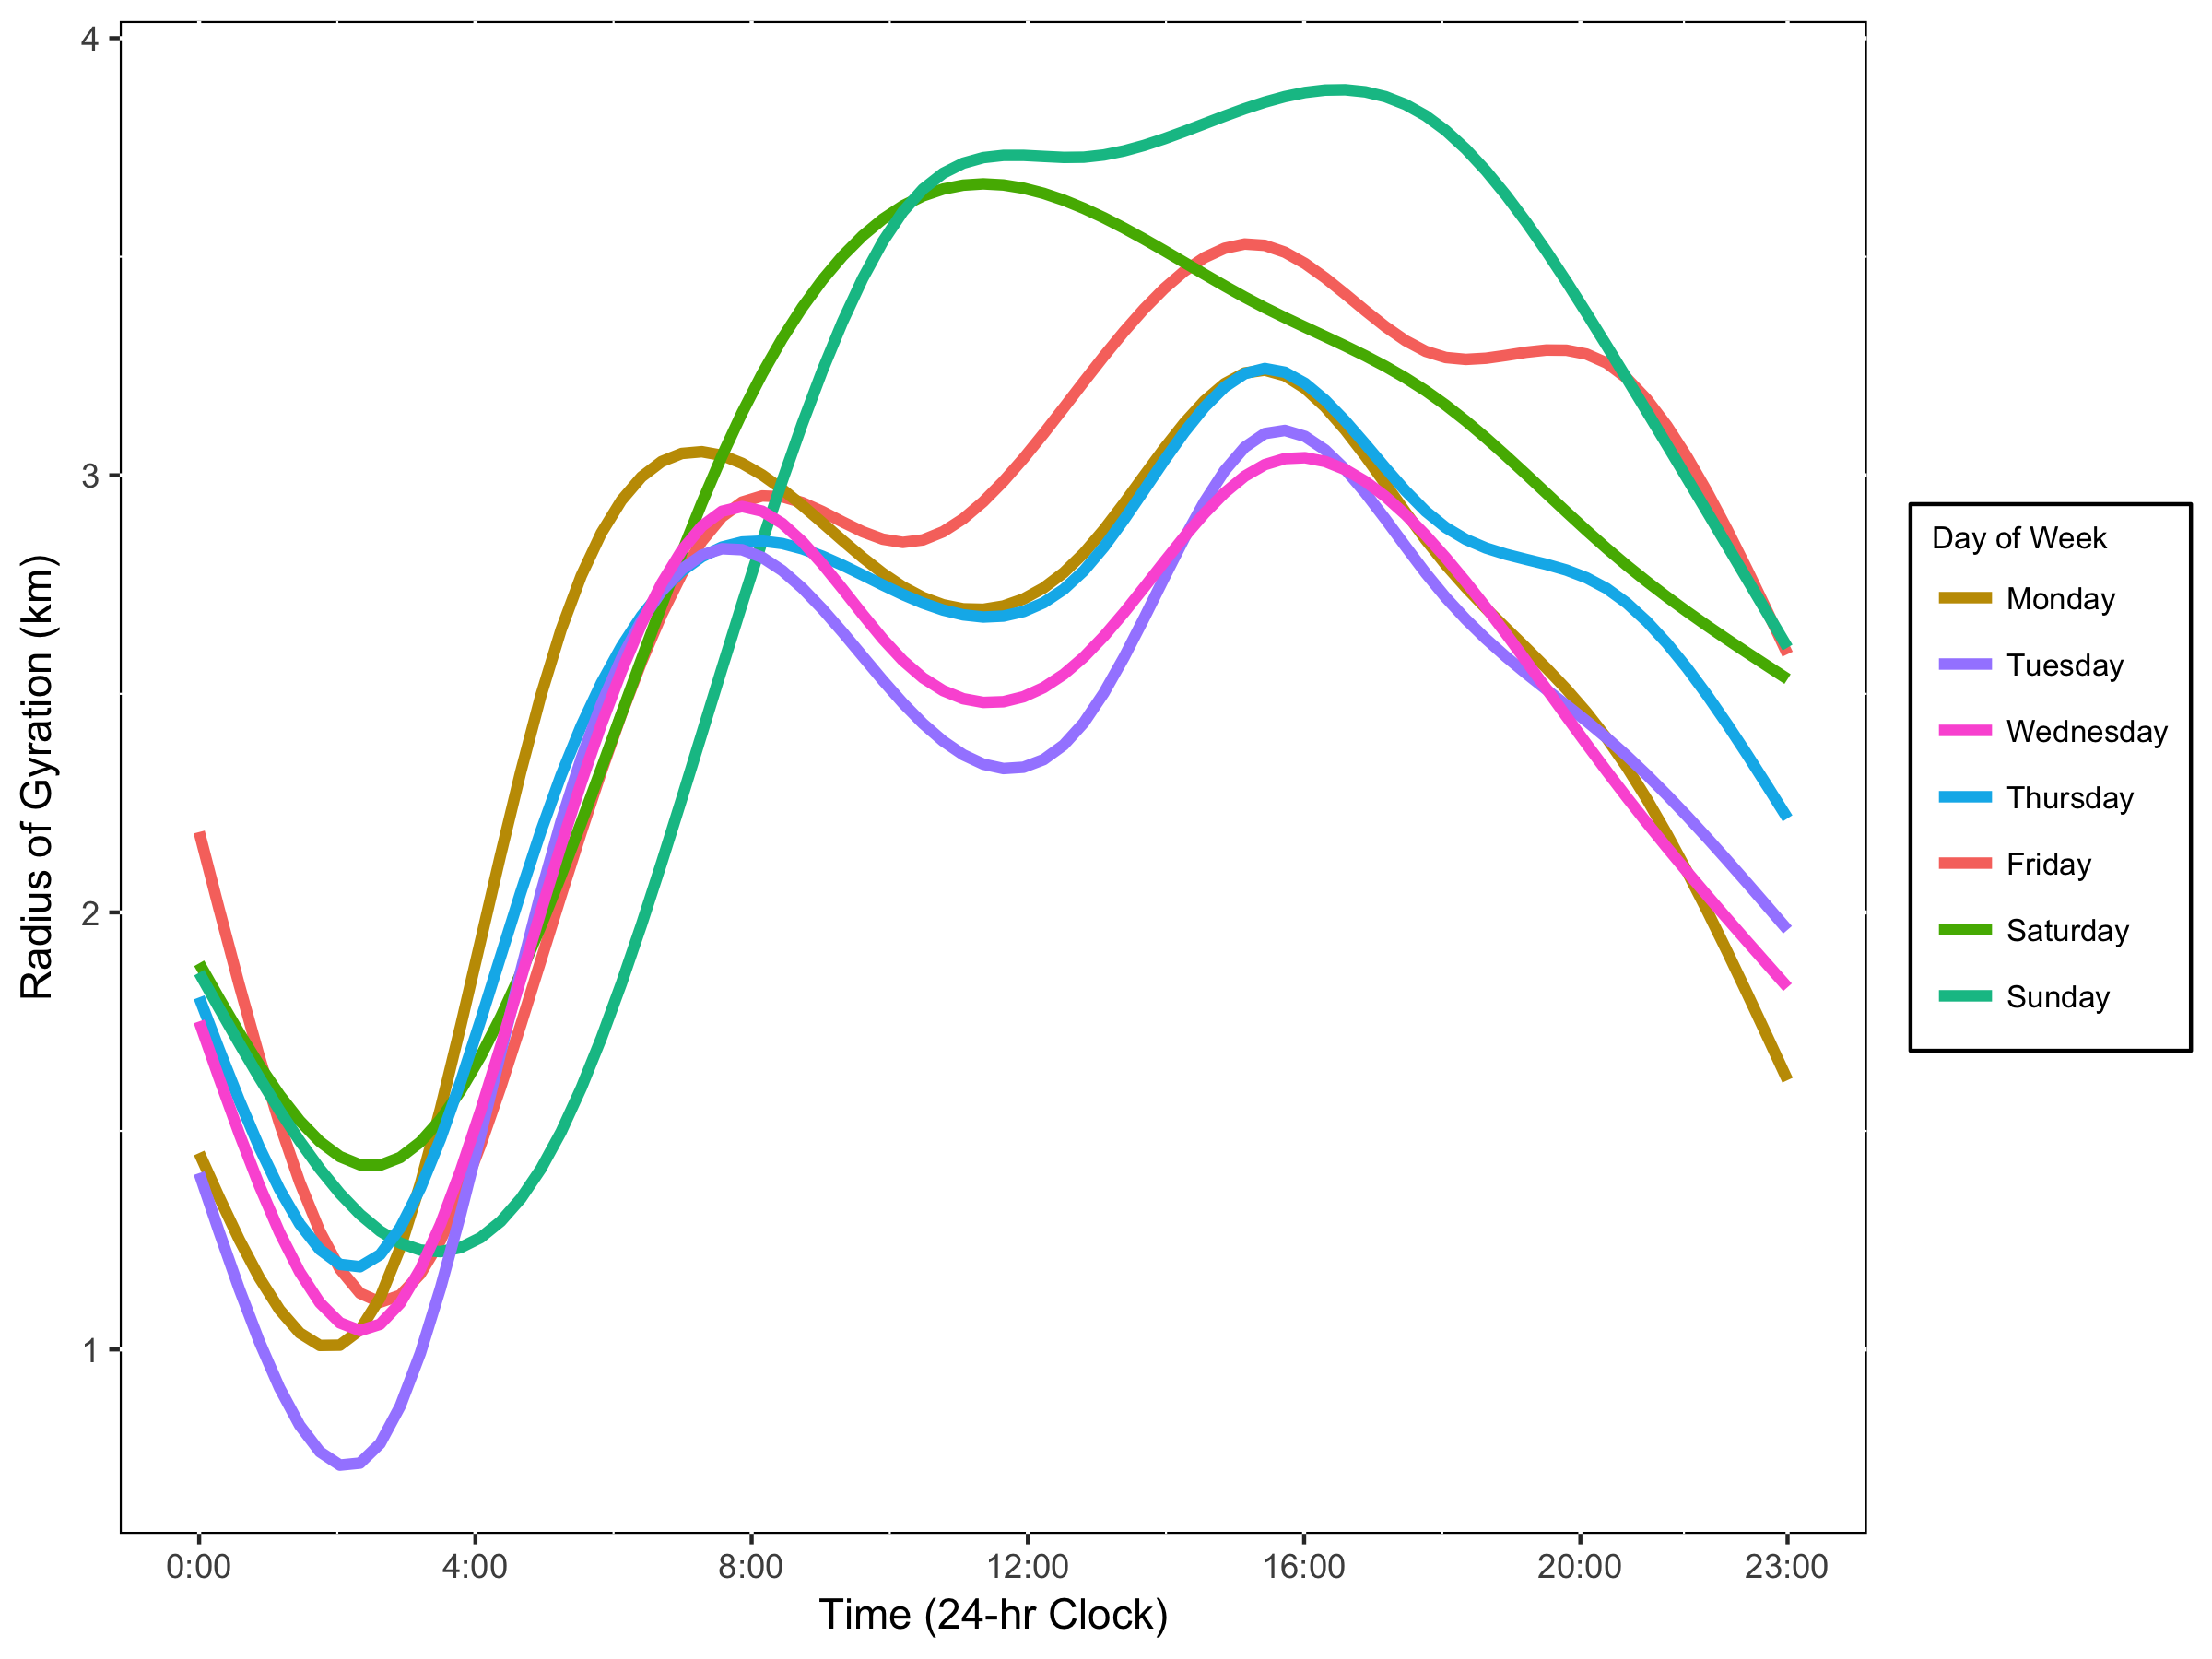 Mobility Patterns by Time of Day and Days of Week